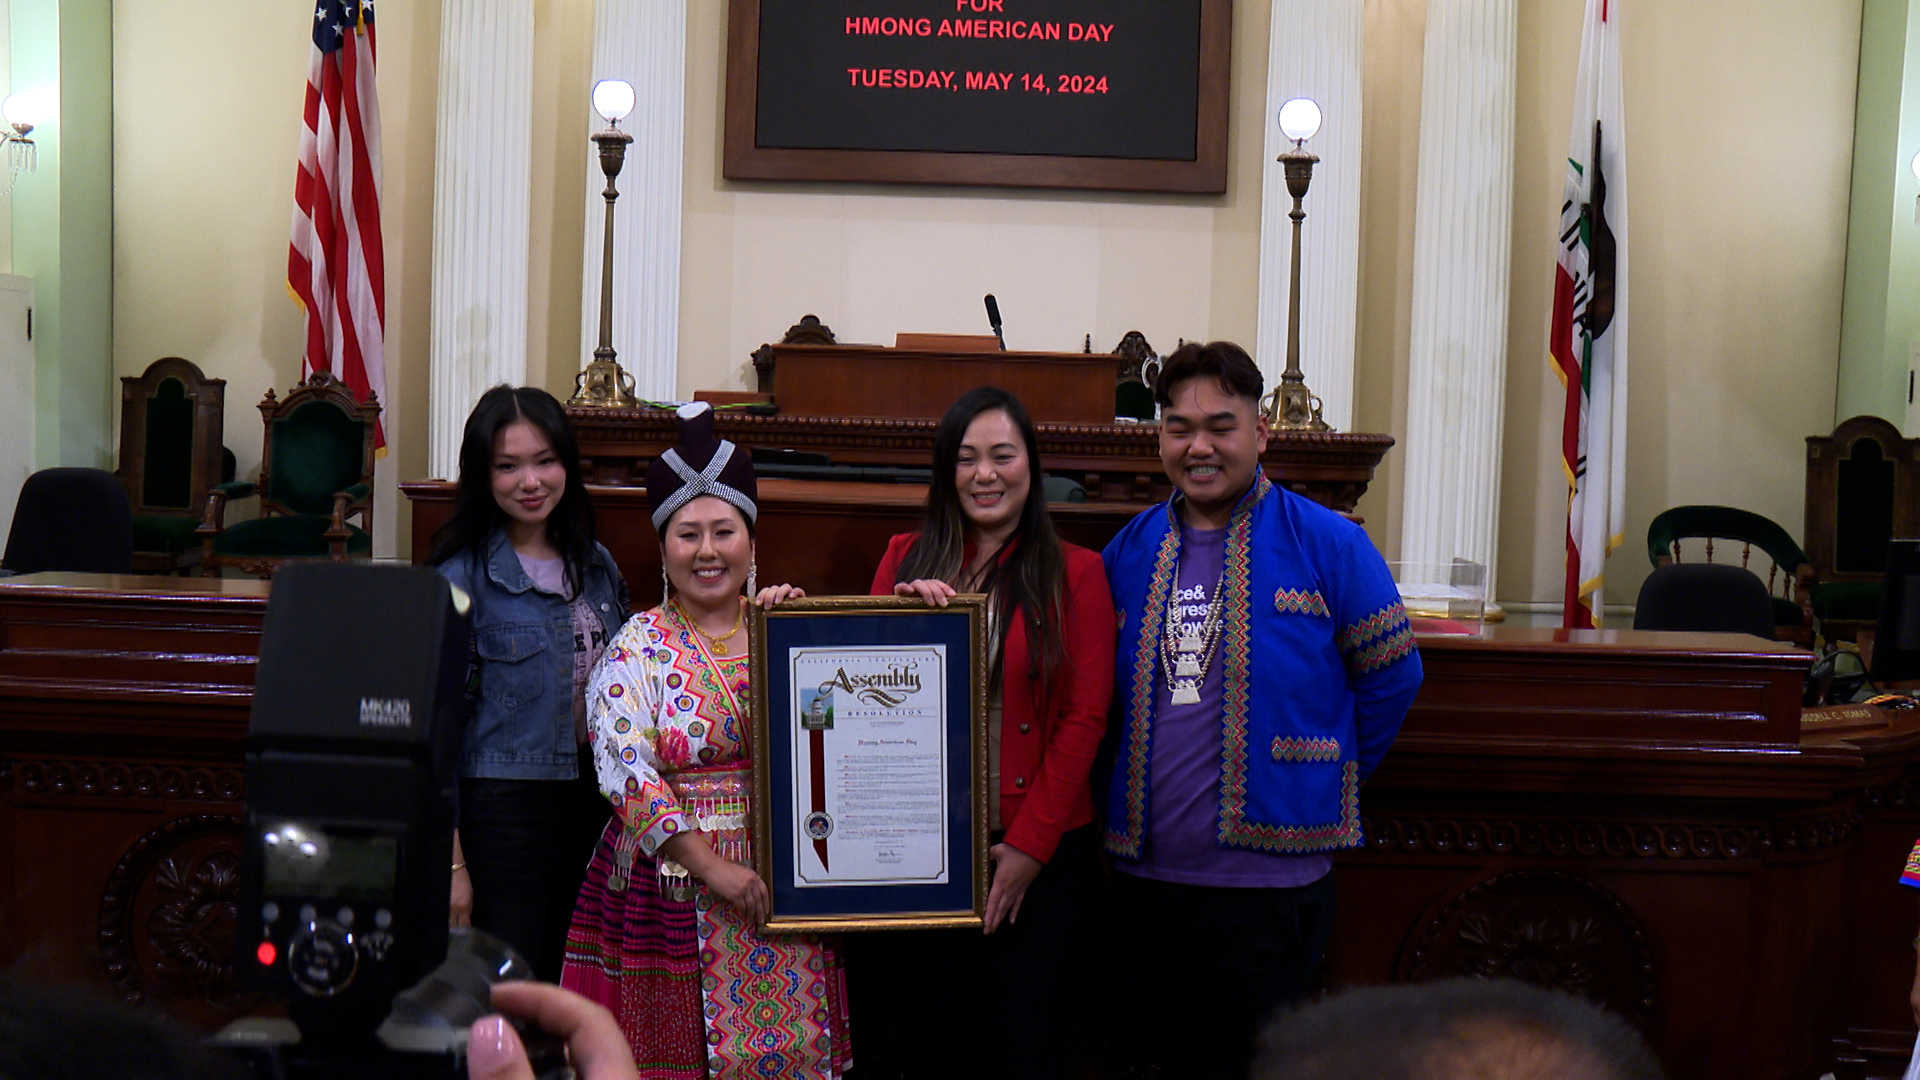 This day will recognize Hmong Americans for their contributions and accomplishments to California and the United States.